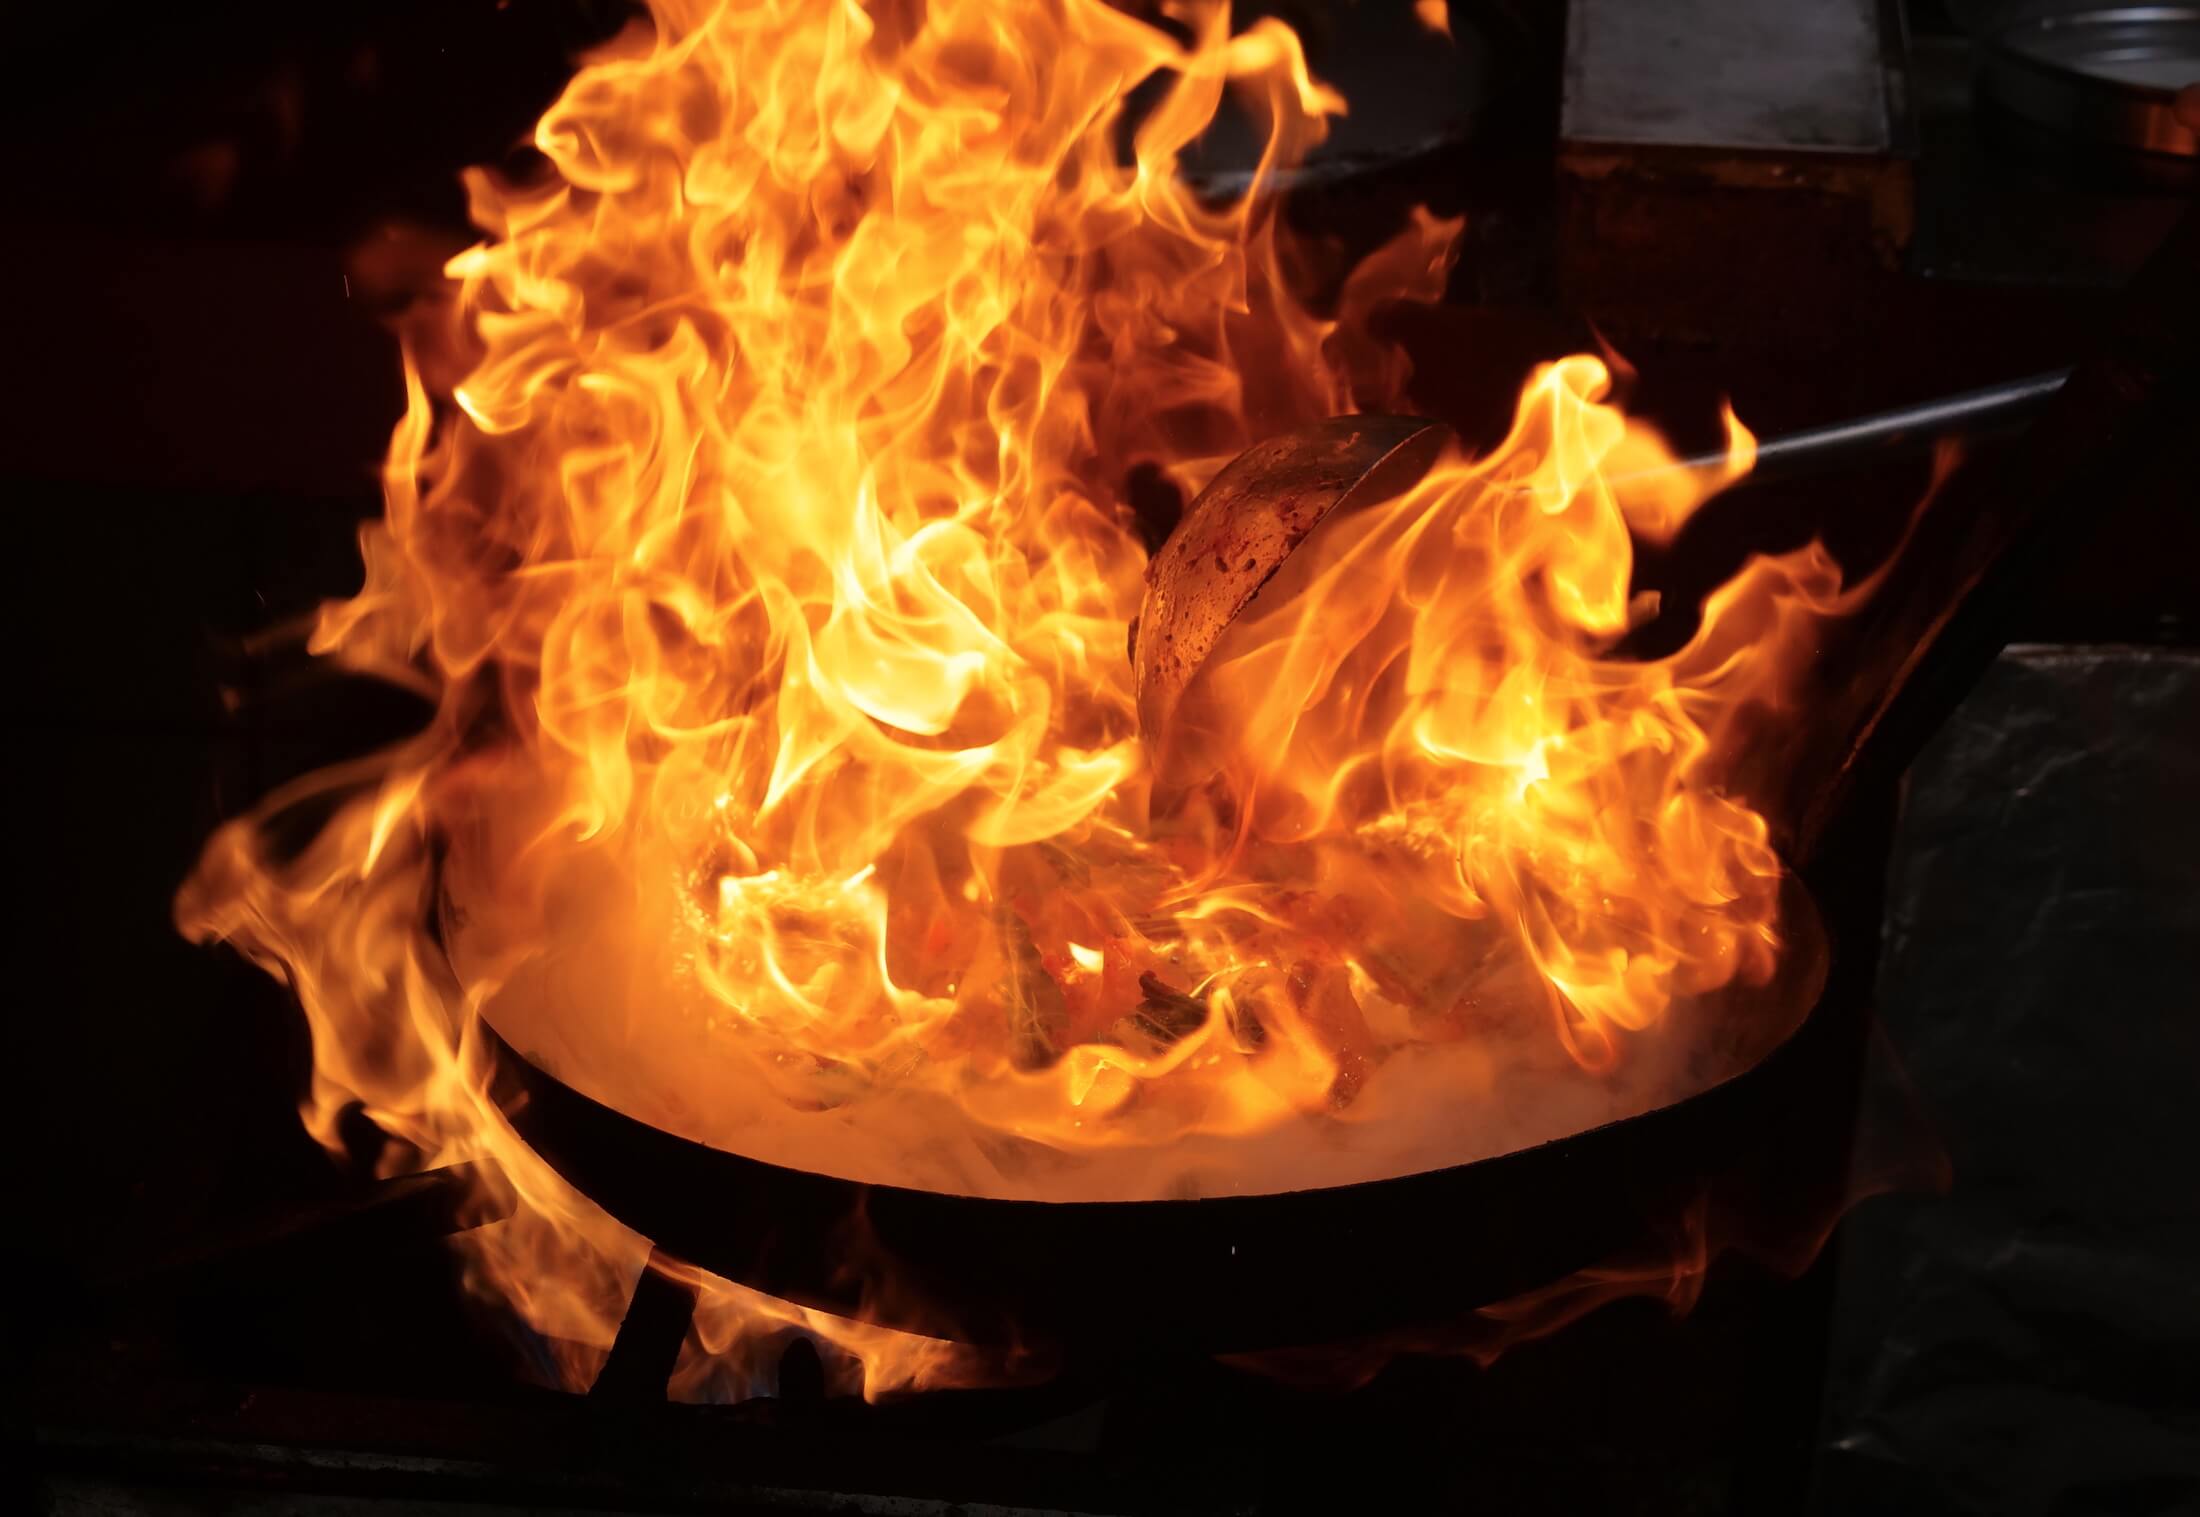 It's amazing to see the amount of fire Chef Wong uses while cooking